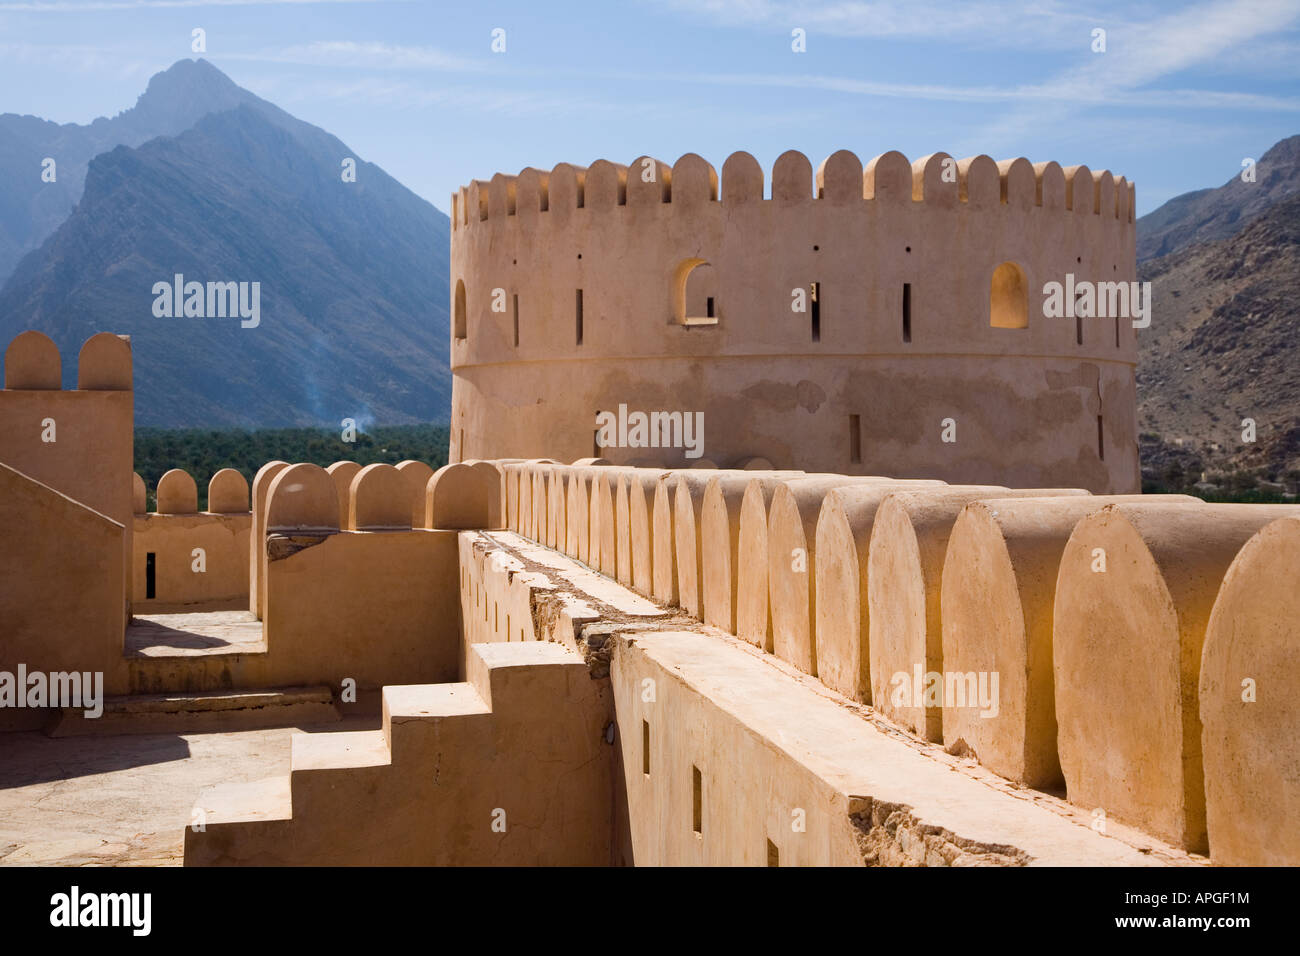 Battlements and tower of Nakhal Fort with mountains beyond in the Sultanate of Oman Stock Photo